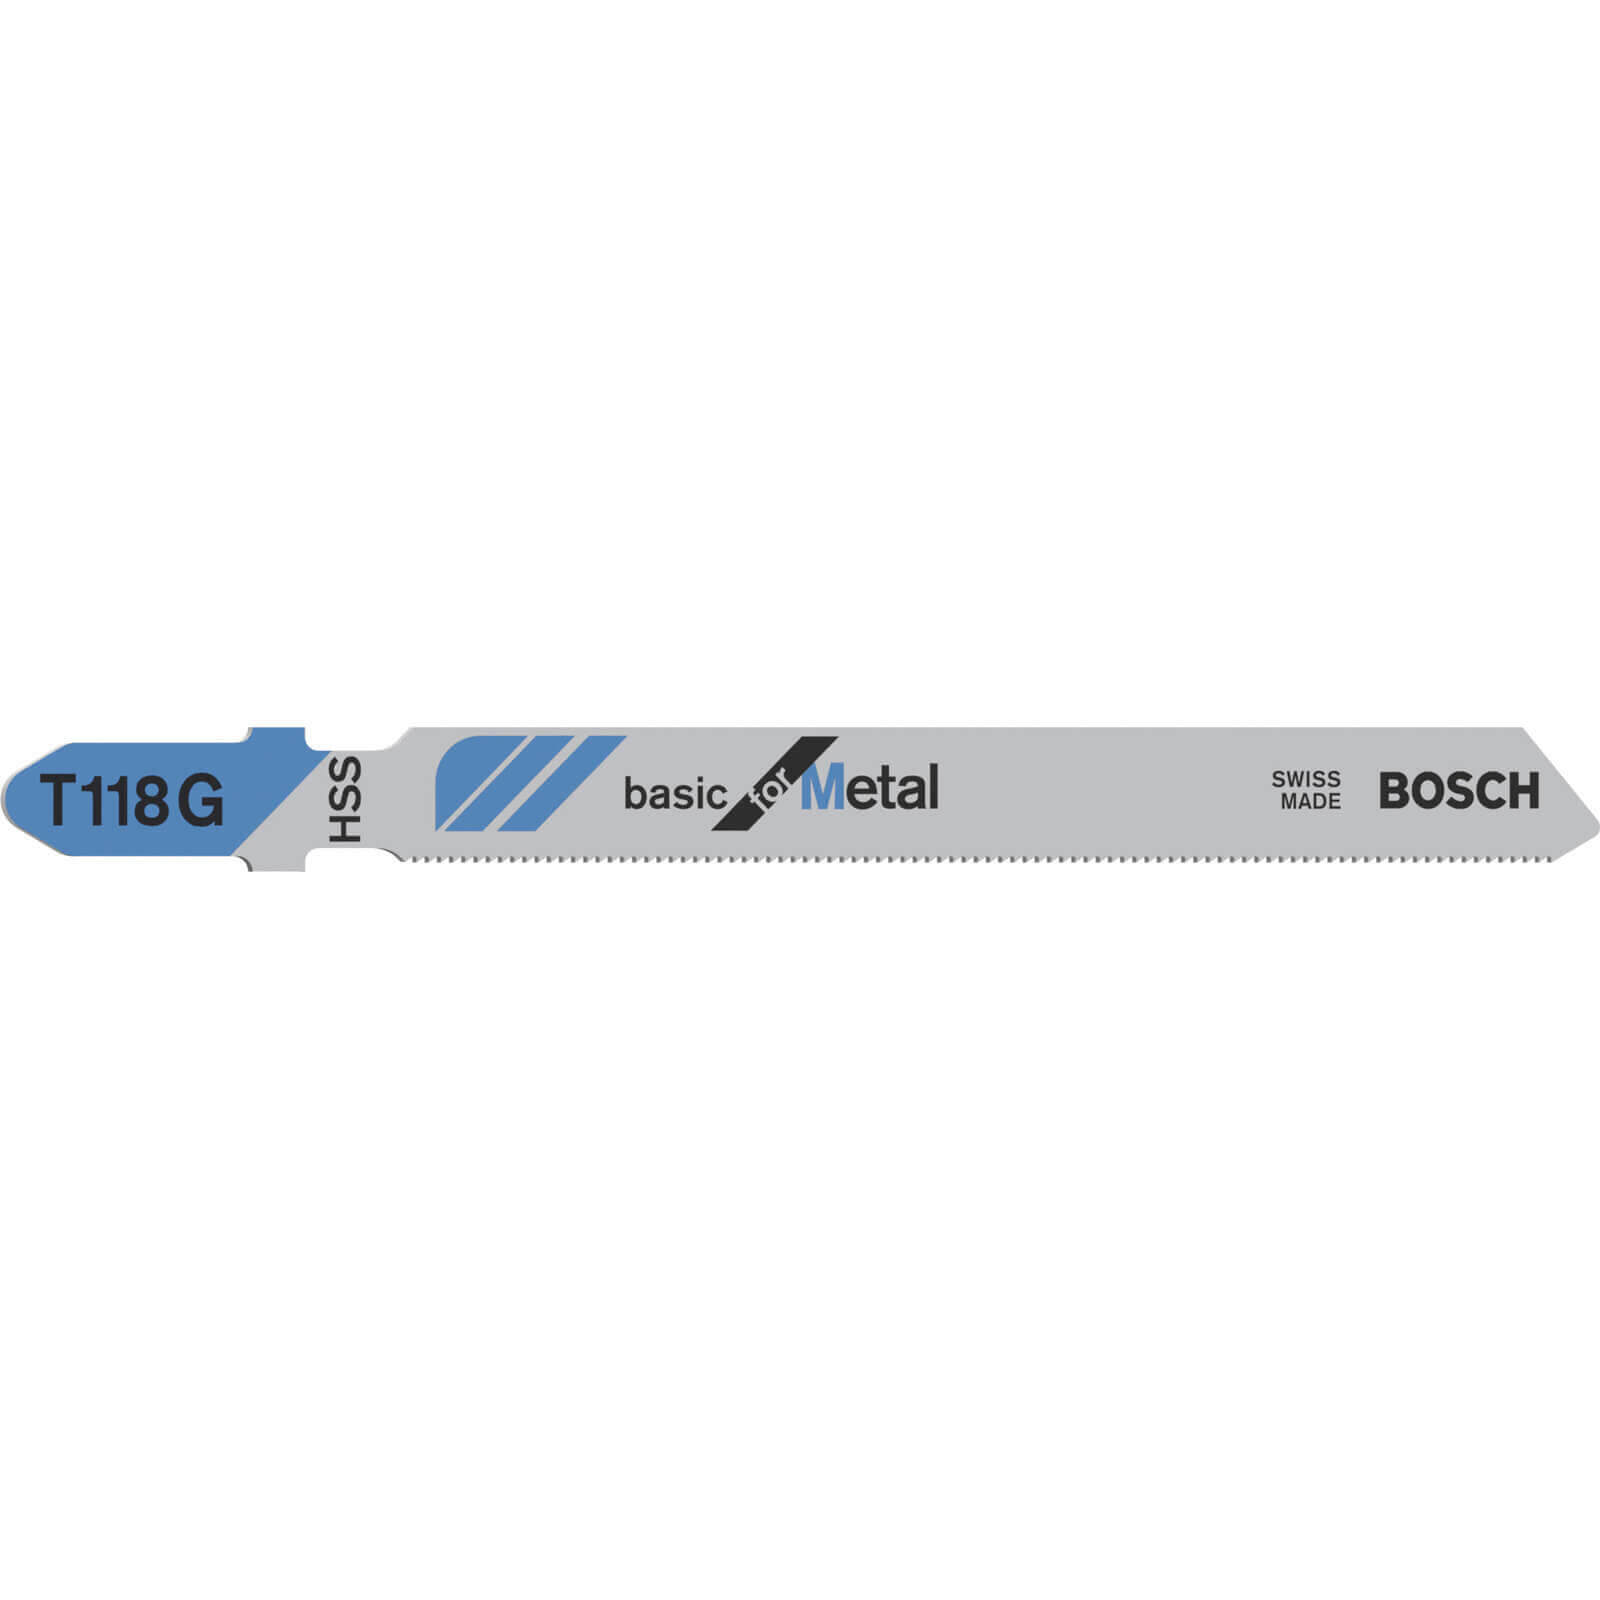 Image of Bosch T118 G Metal Cutting Jigsaw Blades Pack of 3